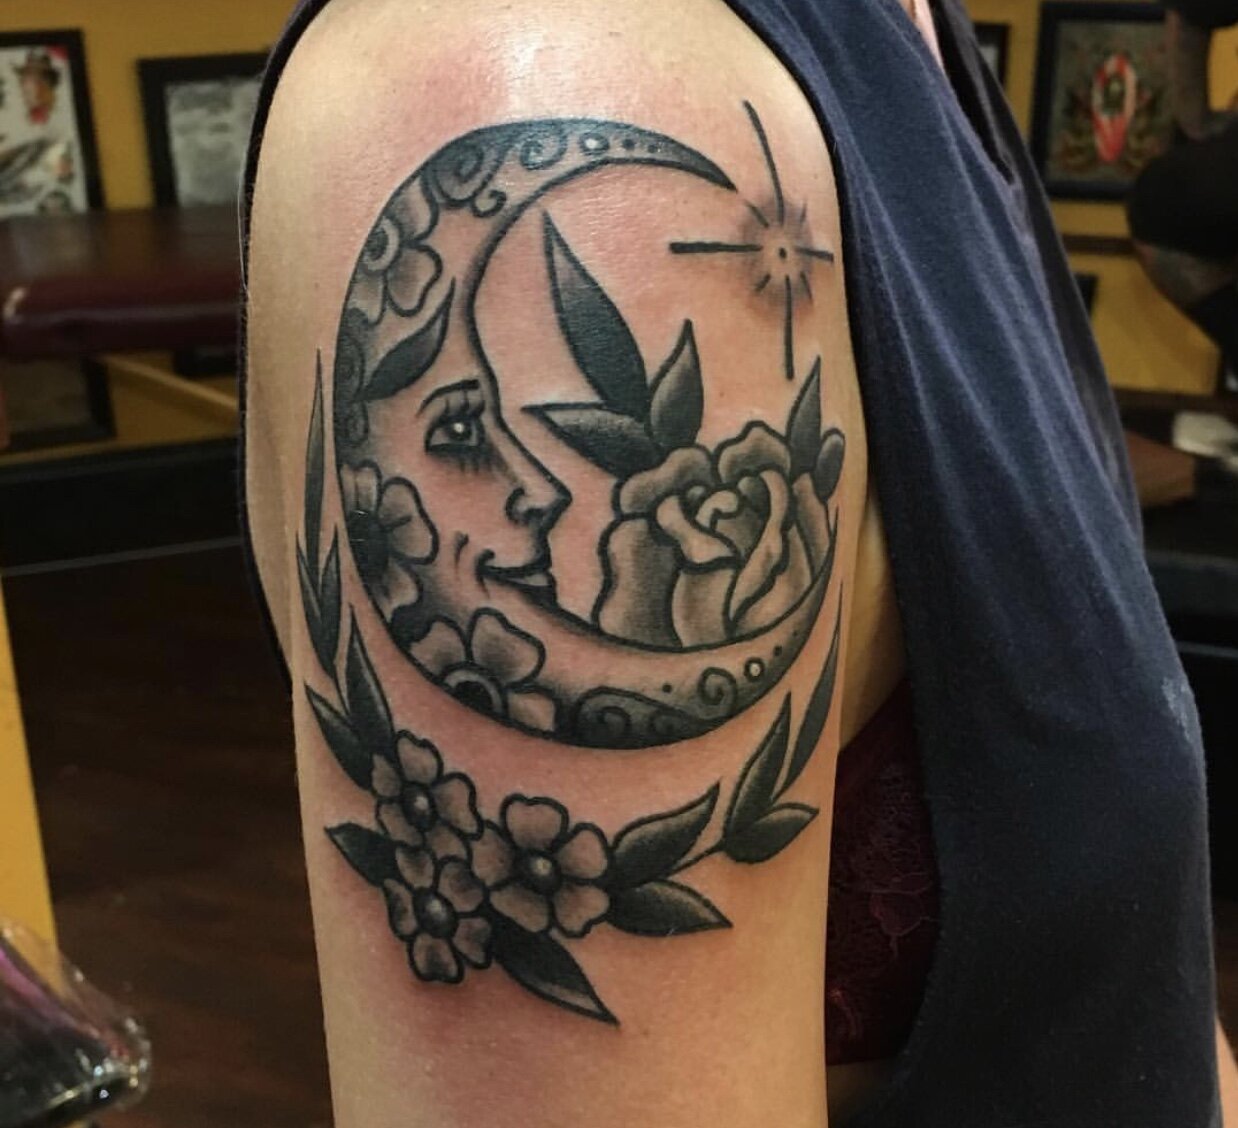 Crescent moon tattoo by Andrew Patch at Southern Star Tattoo in Atlanta, Georgia.